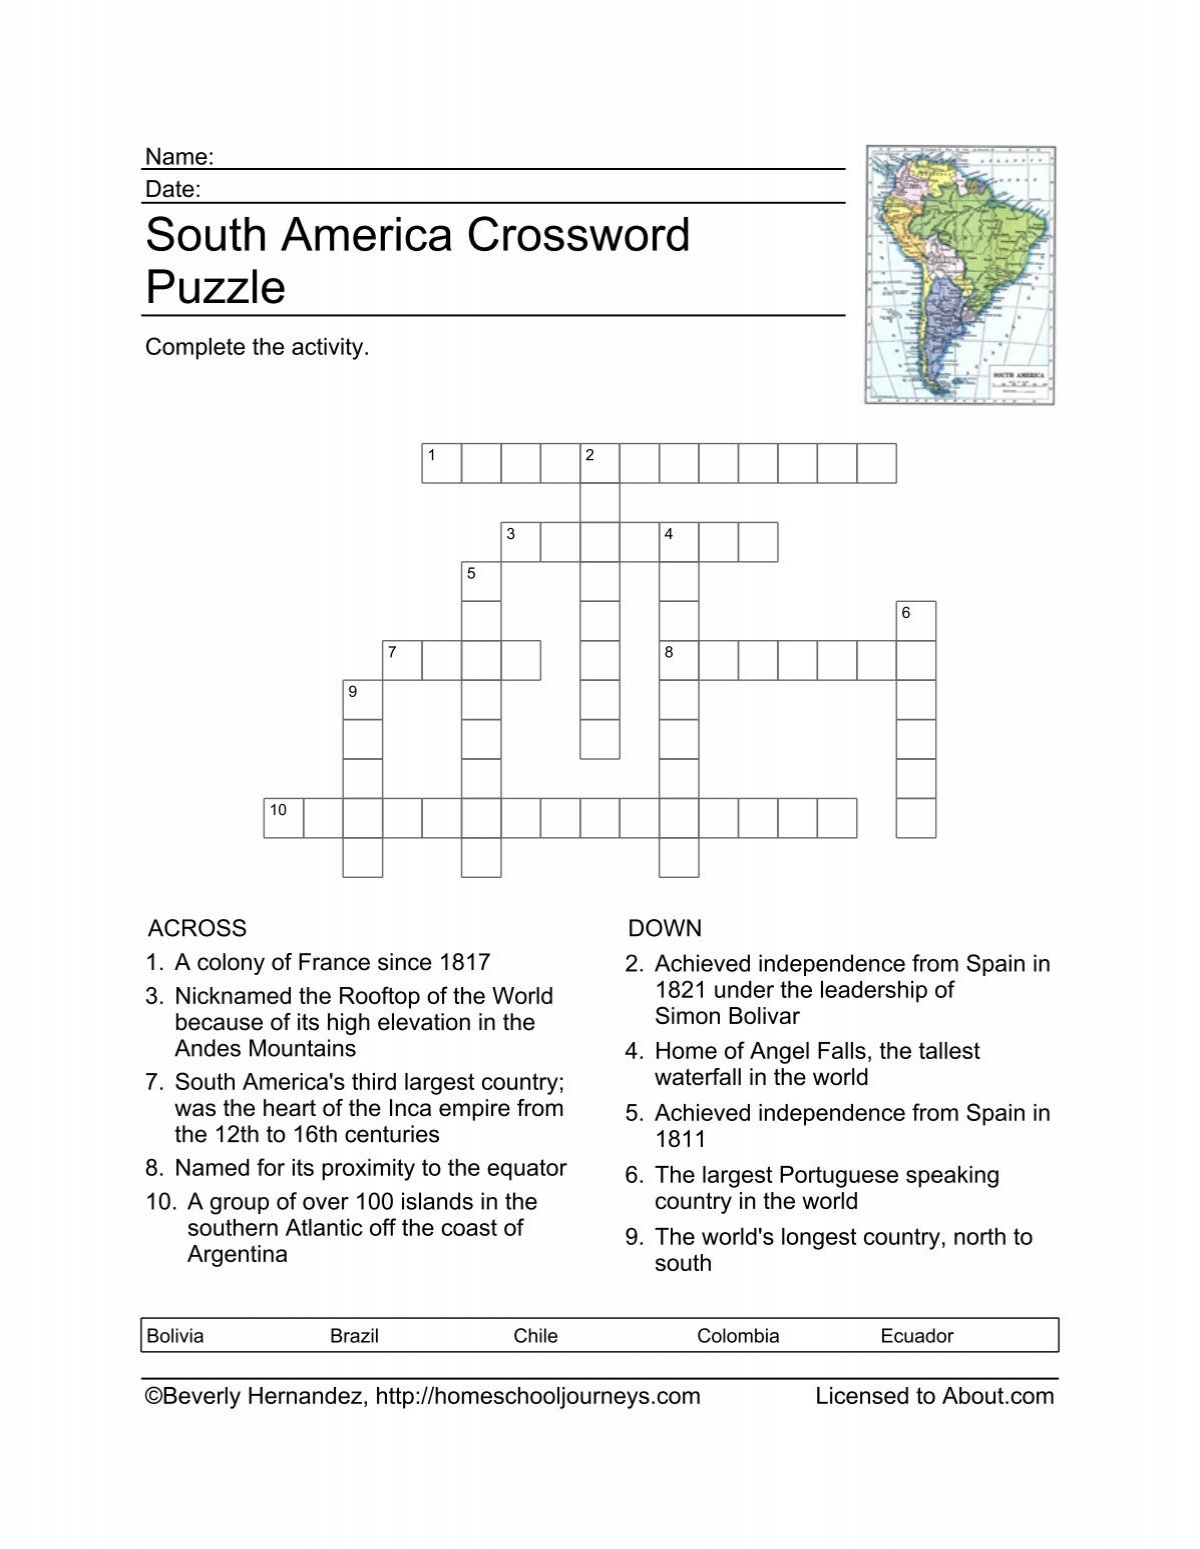 South America Crossword Puzzle Homeschooling About com